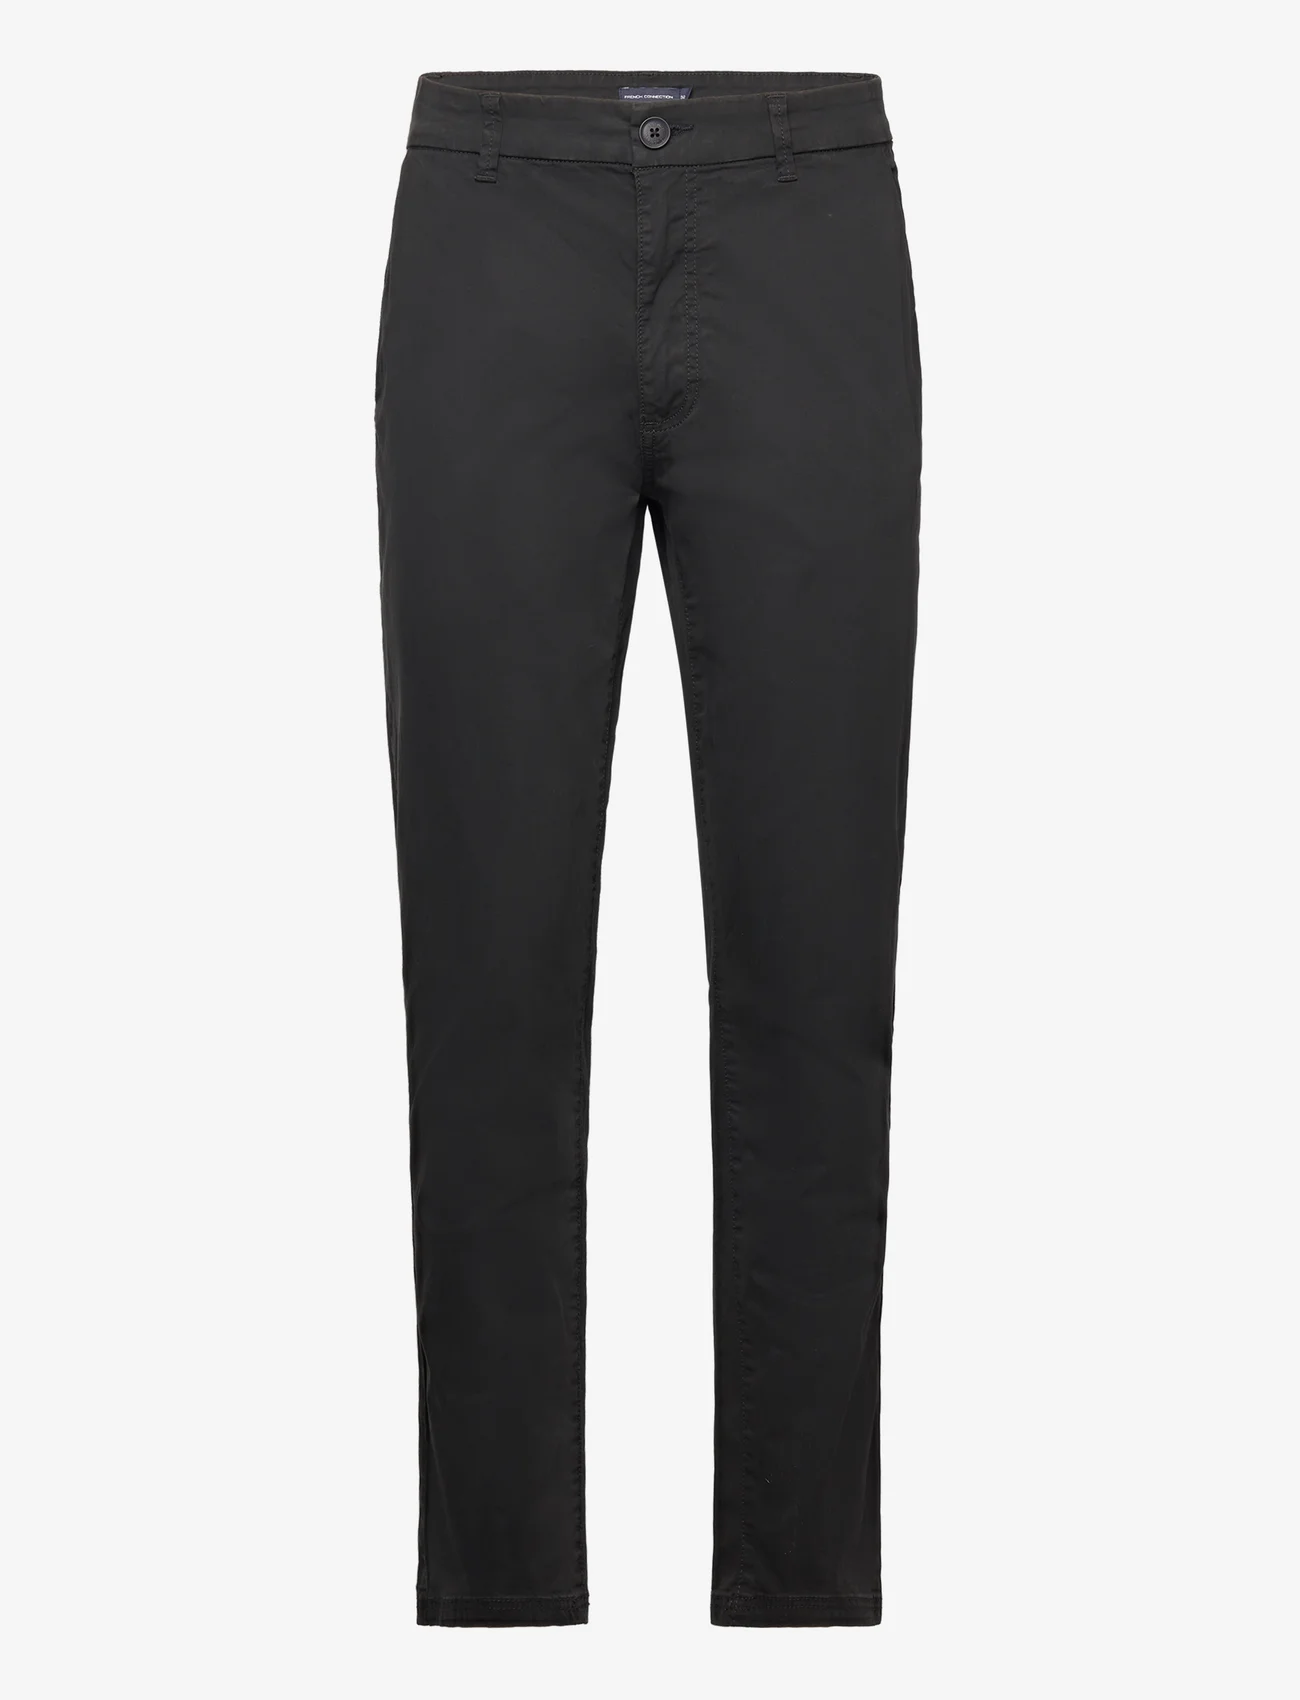 French Connection - CHINO - chinos - black - 0